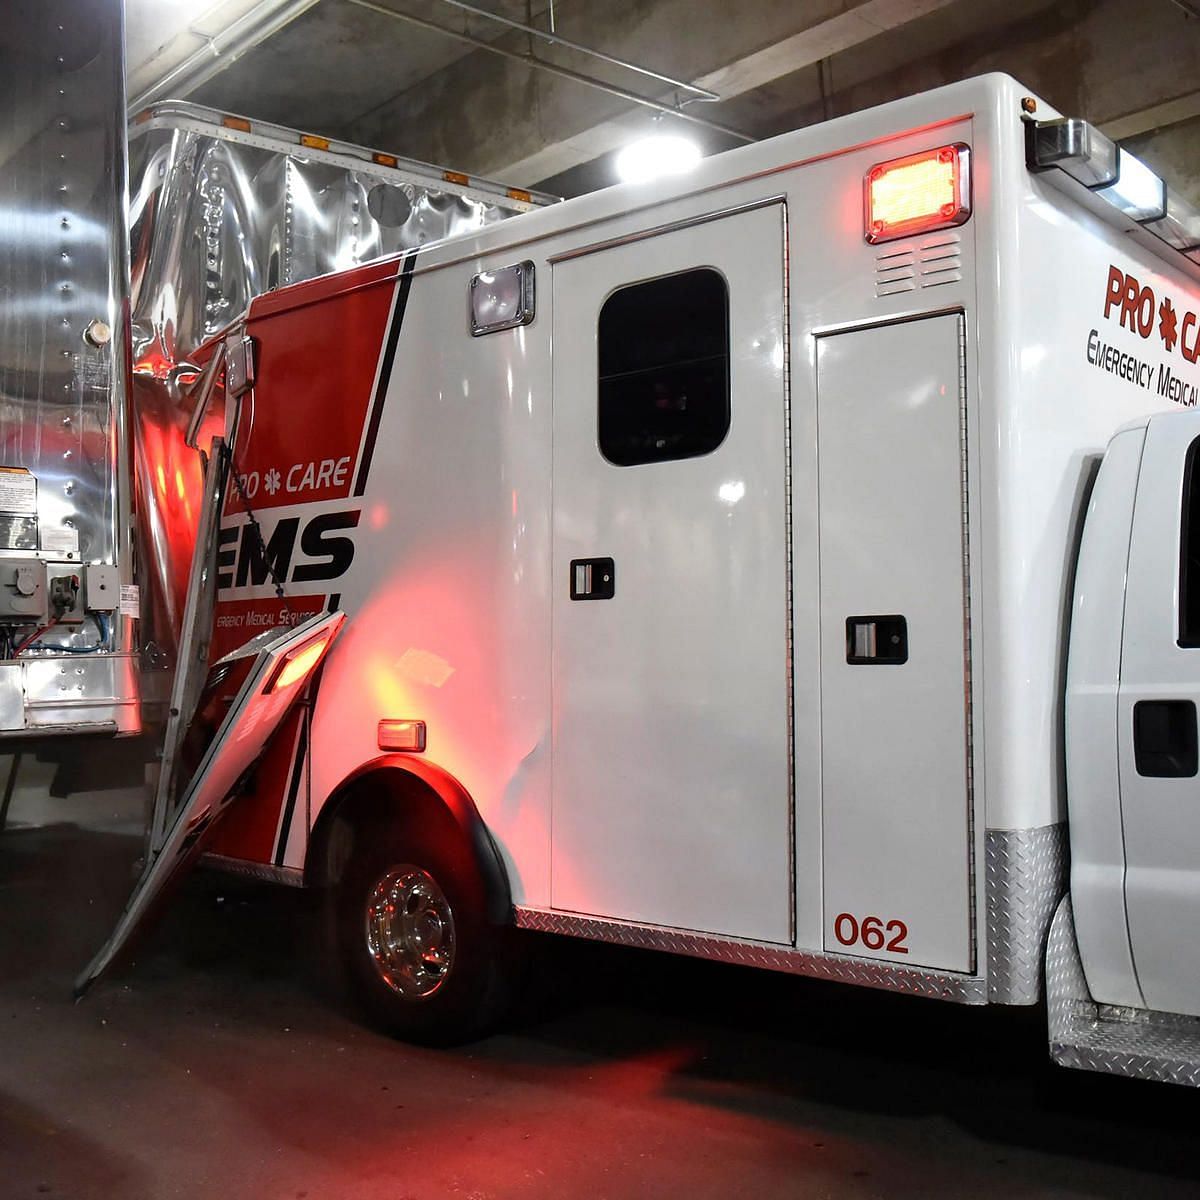 Ambulances have a storied history in pro wrestling.